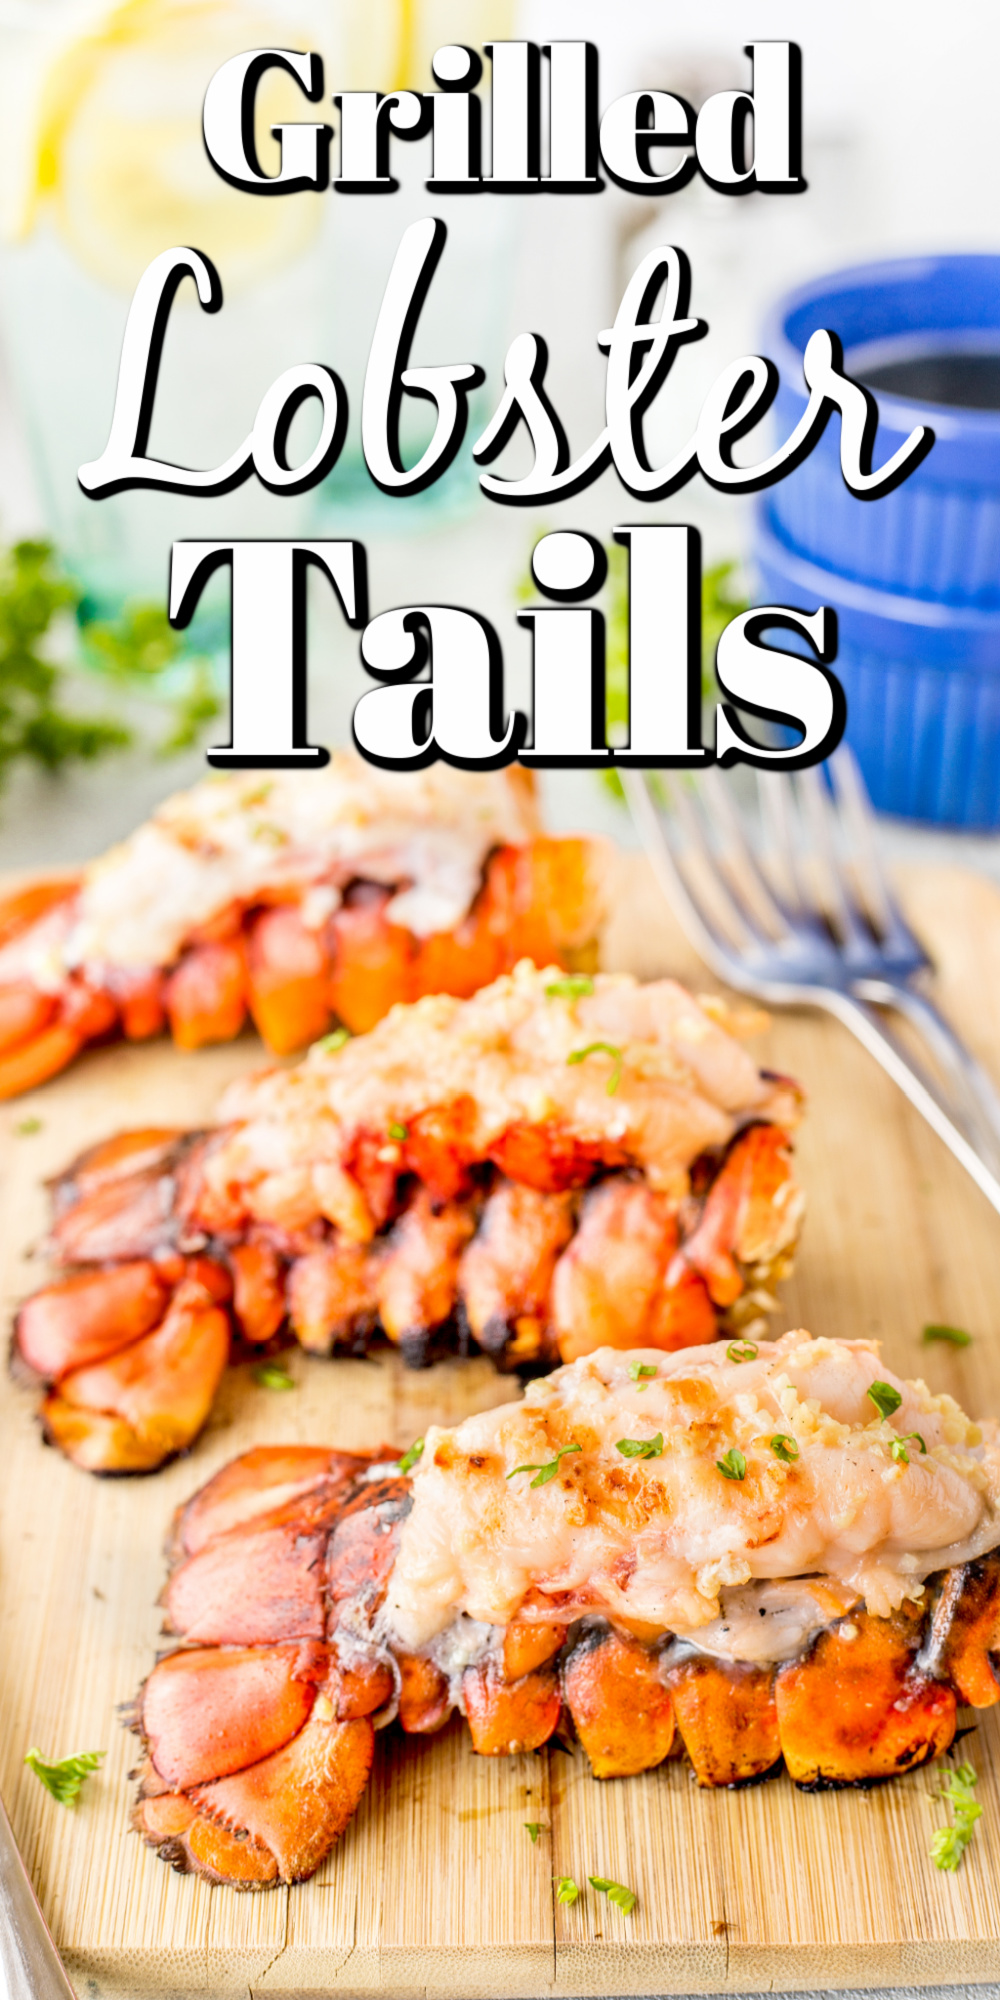 Grilled Lobster Tails are perfect for a summer dinner from the BBQ!